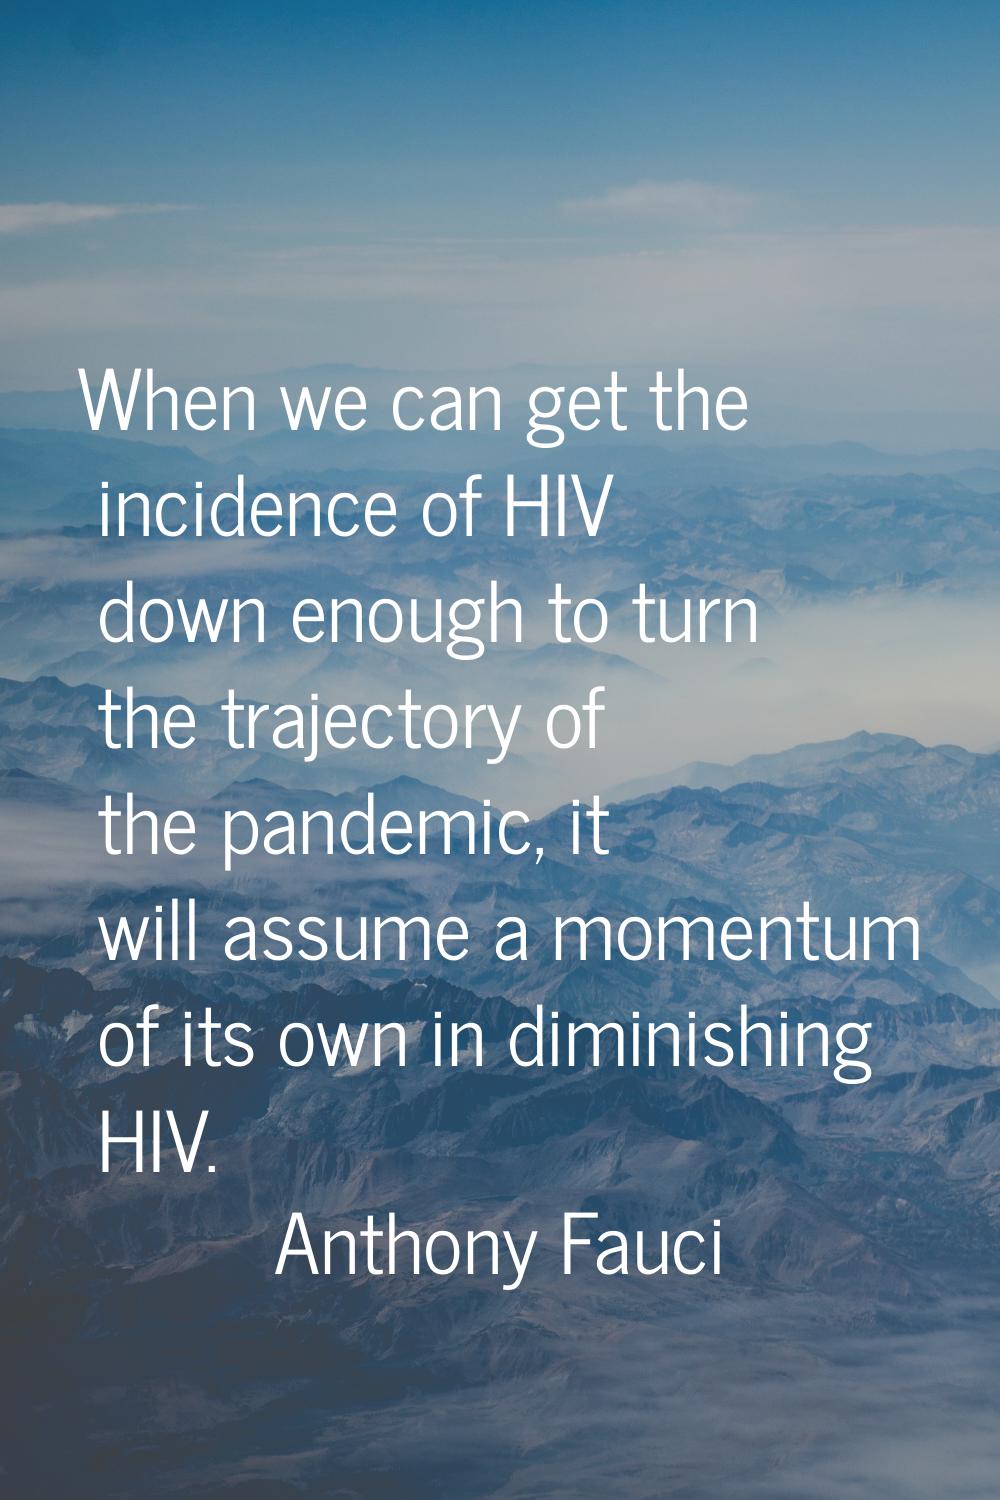 When we can get the incidence of HIV down enough to turn the trajectory of the pandemic, it will as